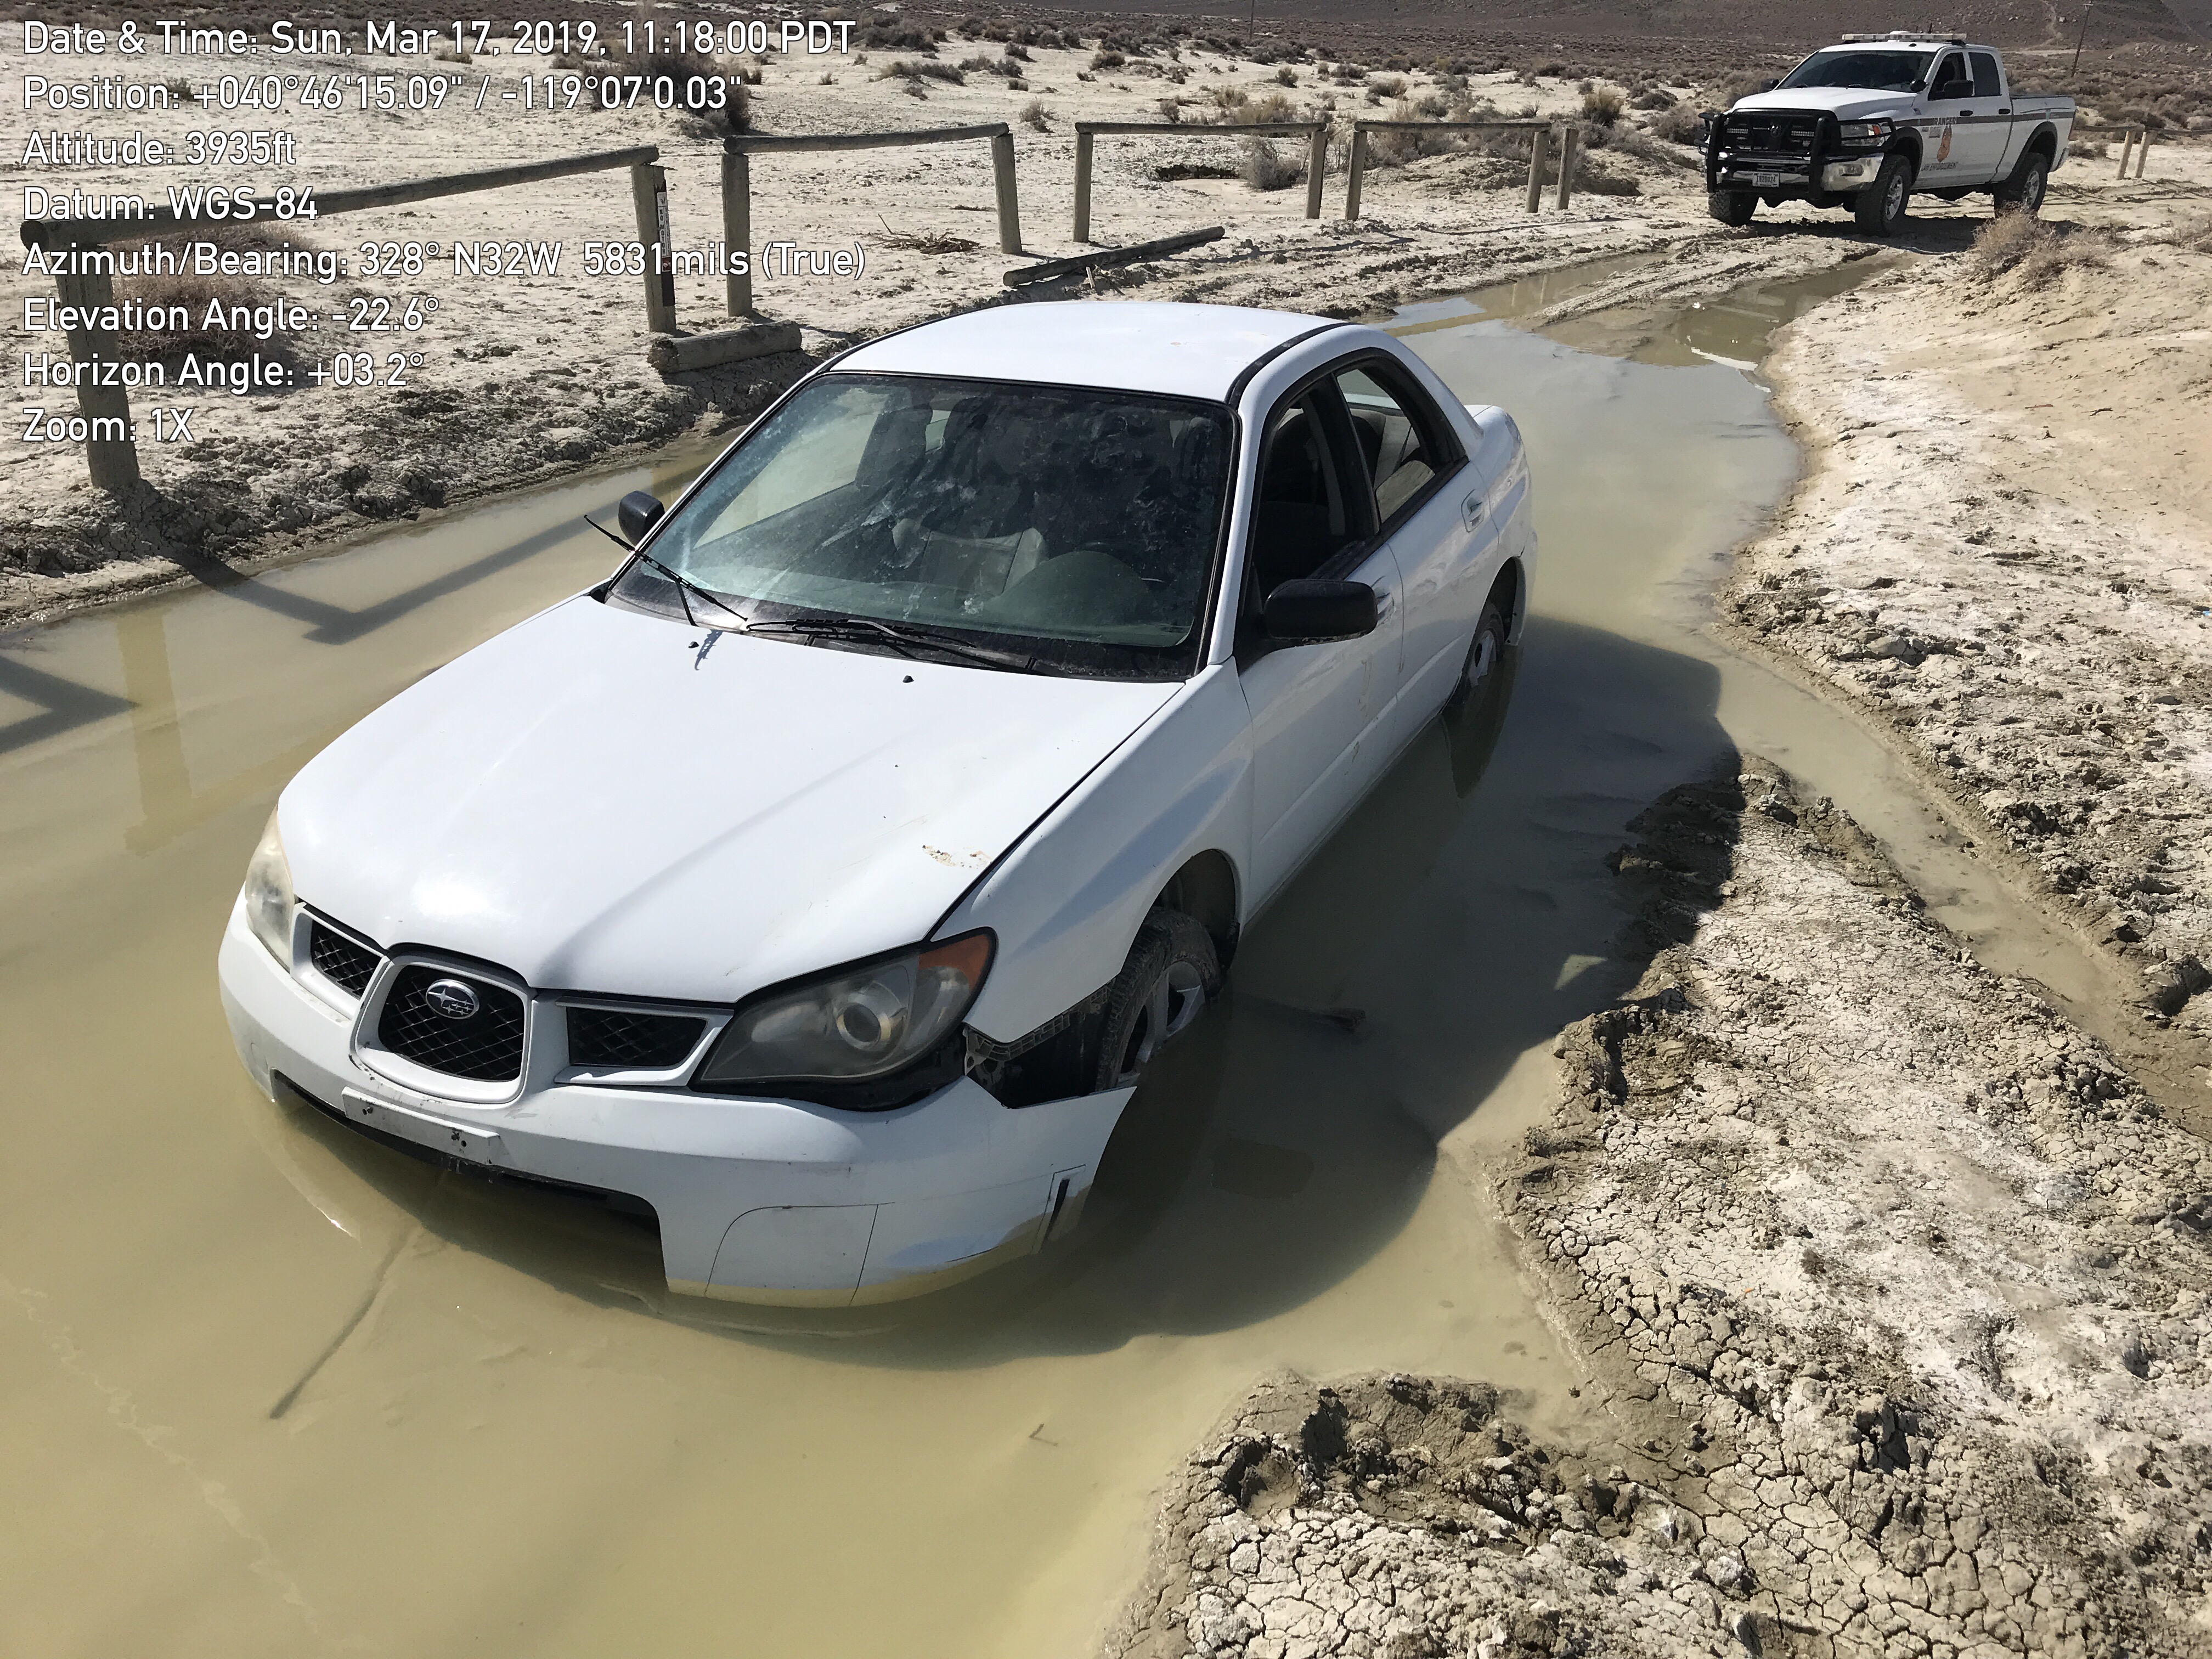 A vehicle is stuck in the mud on the way to Trego Hot Springs.